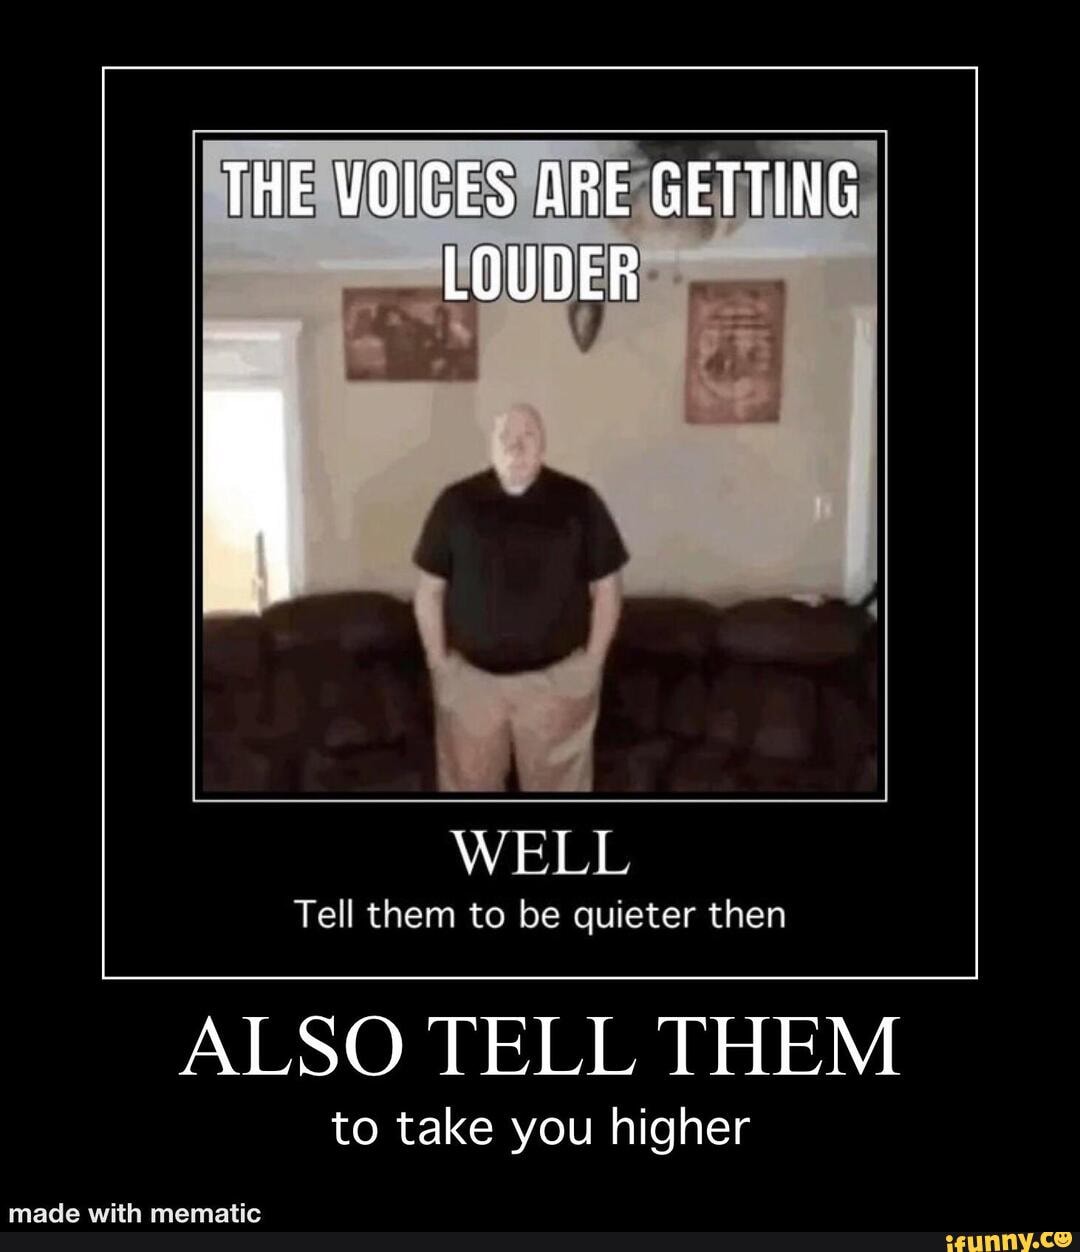 The voices are getting louder make it stop. #goofymime #memes #caption